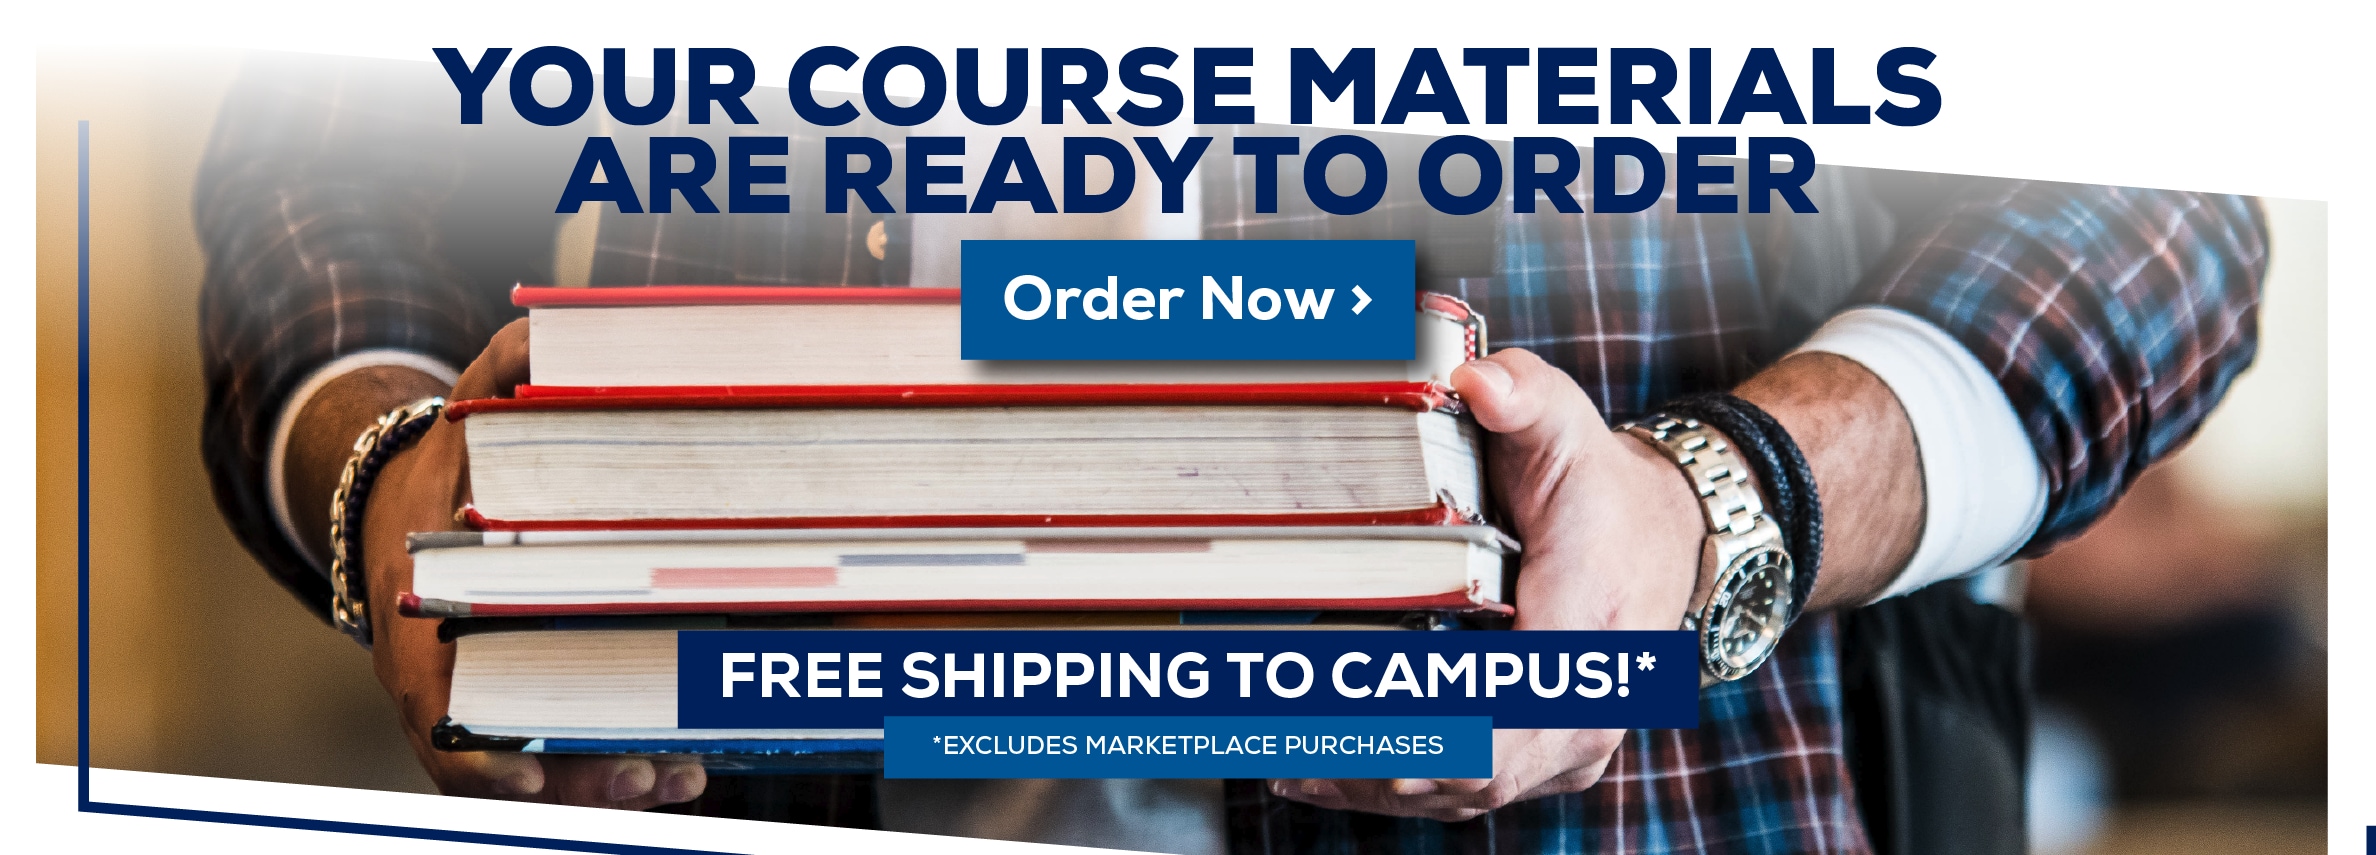 Your Course Materials are Ready to Order. Order Now. Free shipping to campus! *Excludes marketplace purchases.